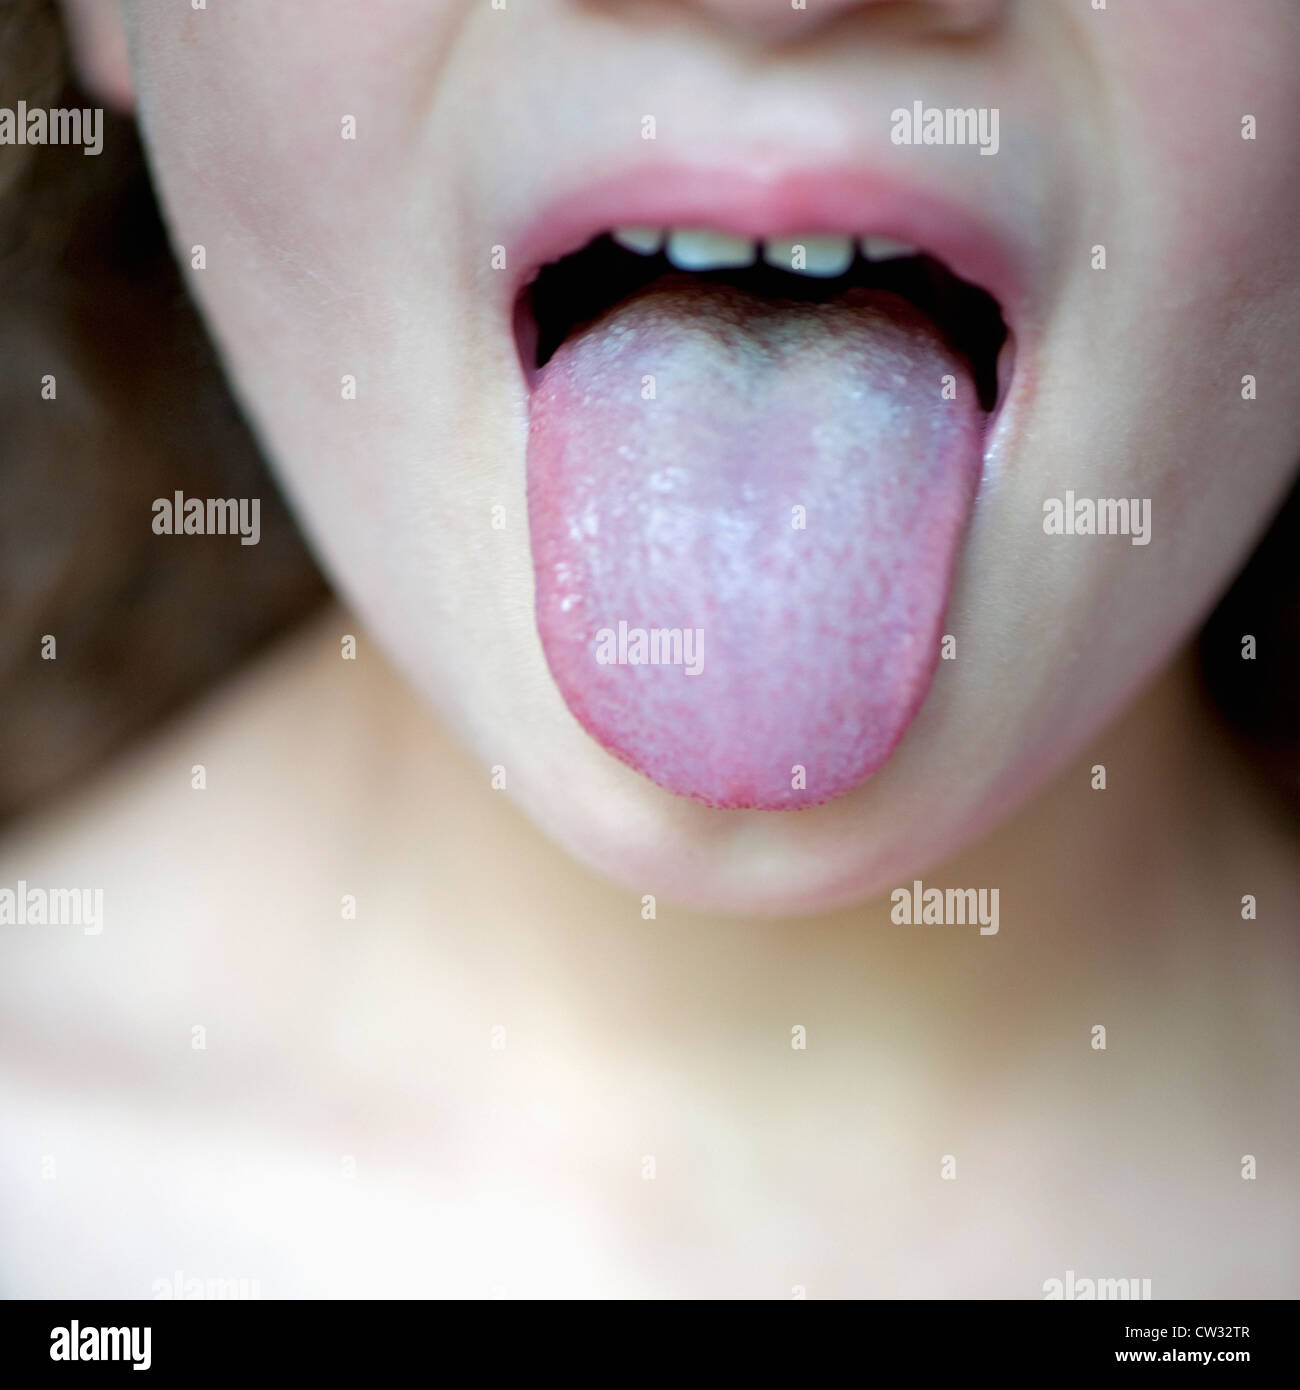 Close-up of a 4 year old girl poking out her tongue in disgust. Stock Photo